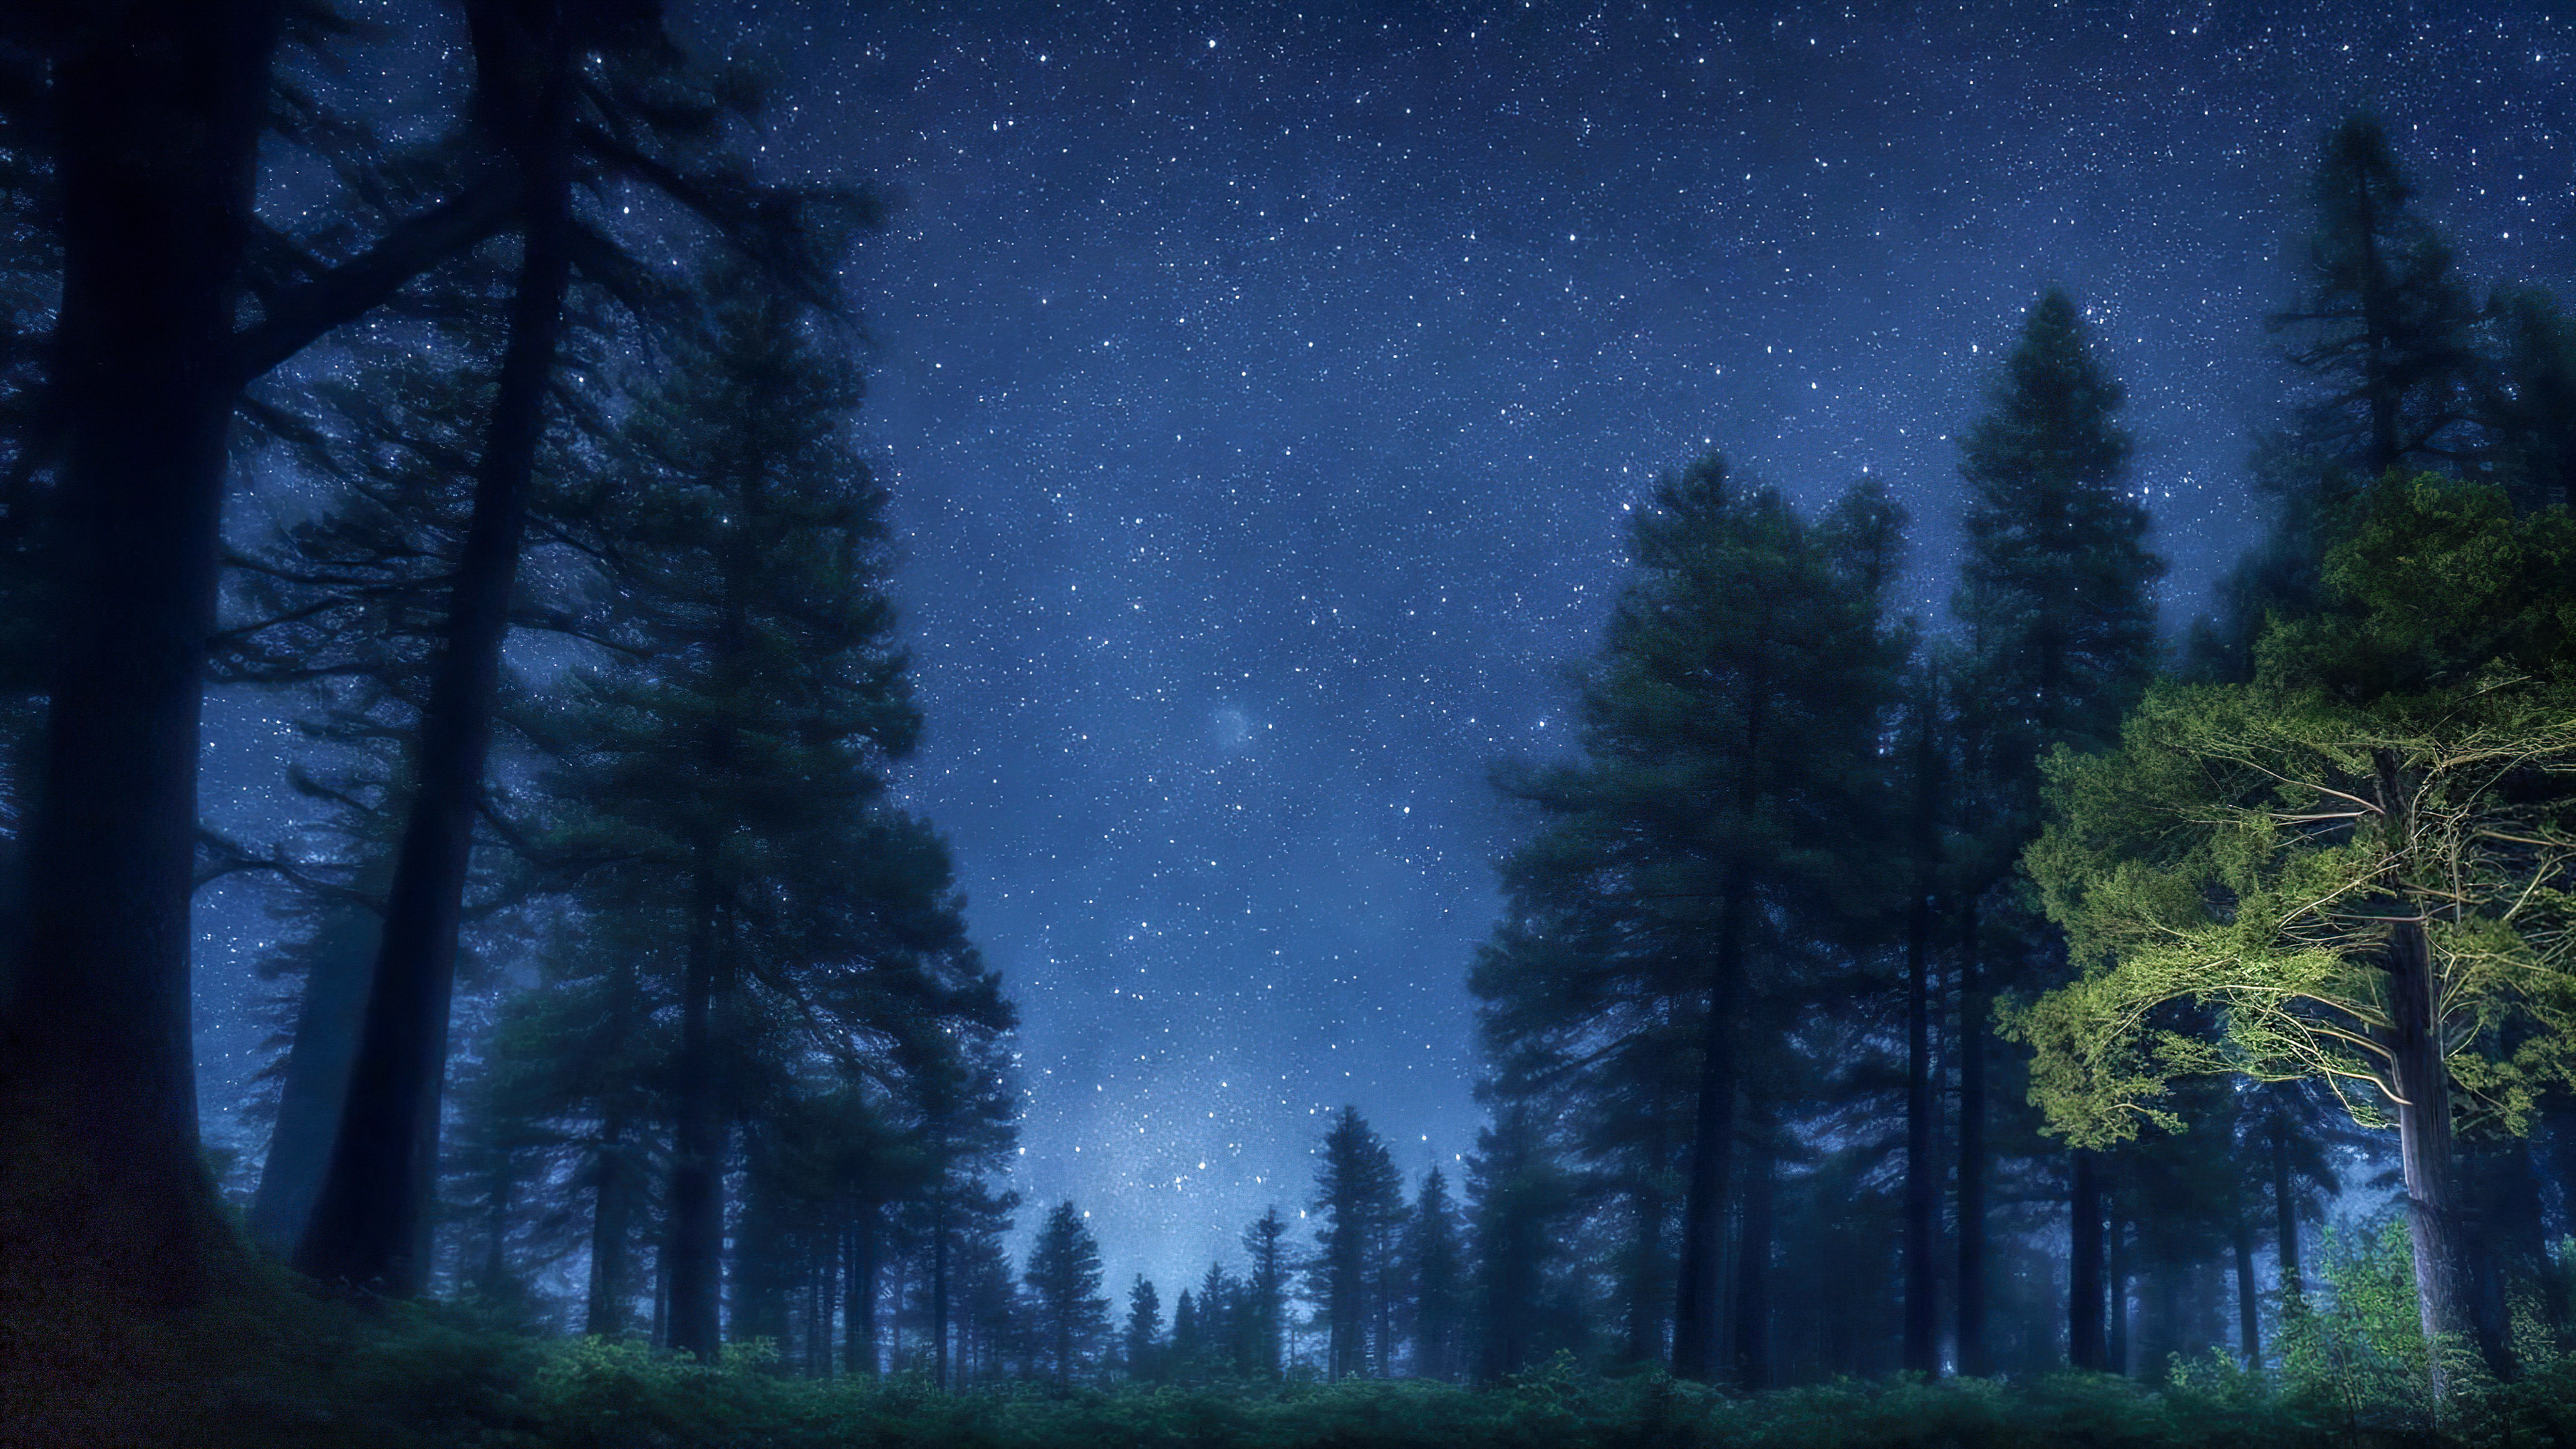 Experience the tranquility of night sky background in 4K, featuring a tranquil forest at night, with tall, ancient trees under a starry sky and a soft, moonlit glow.